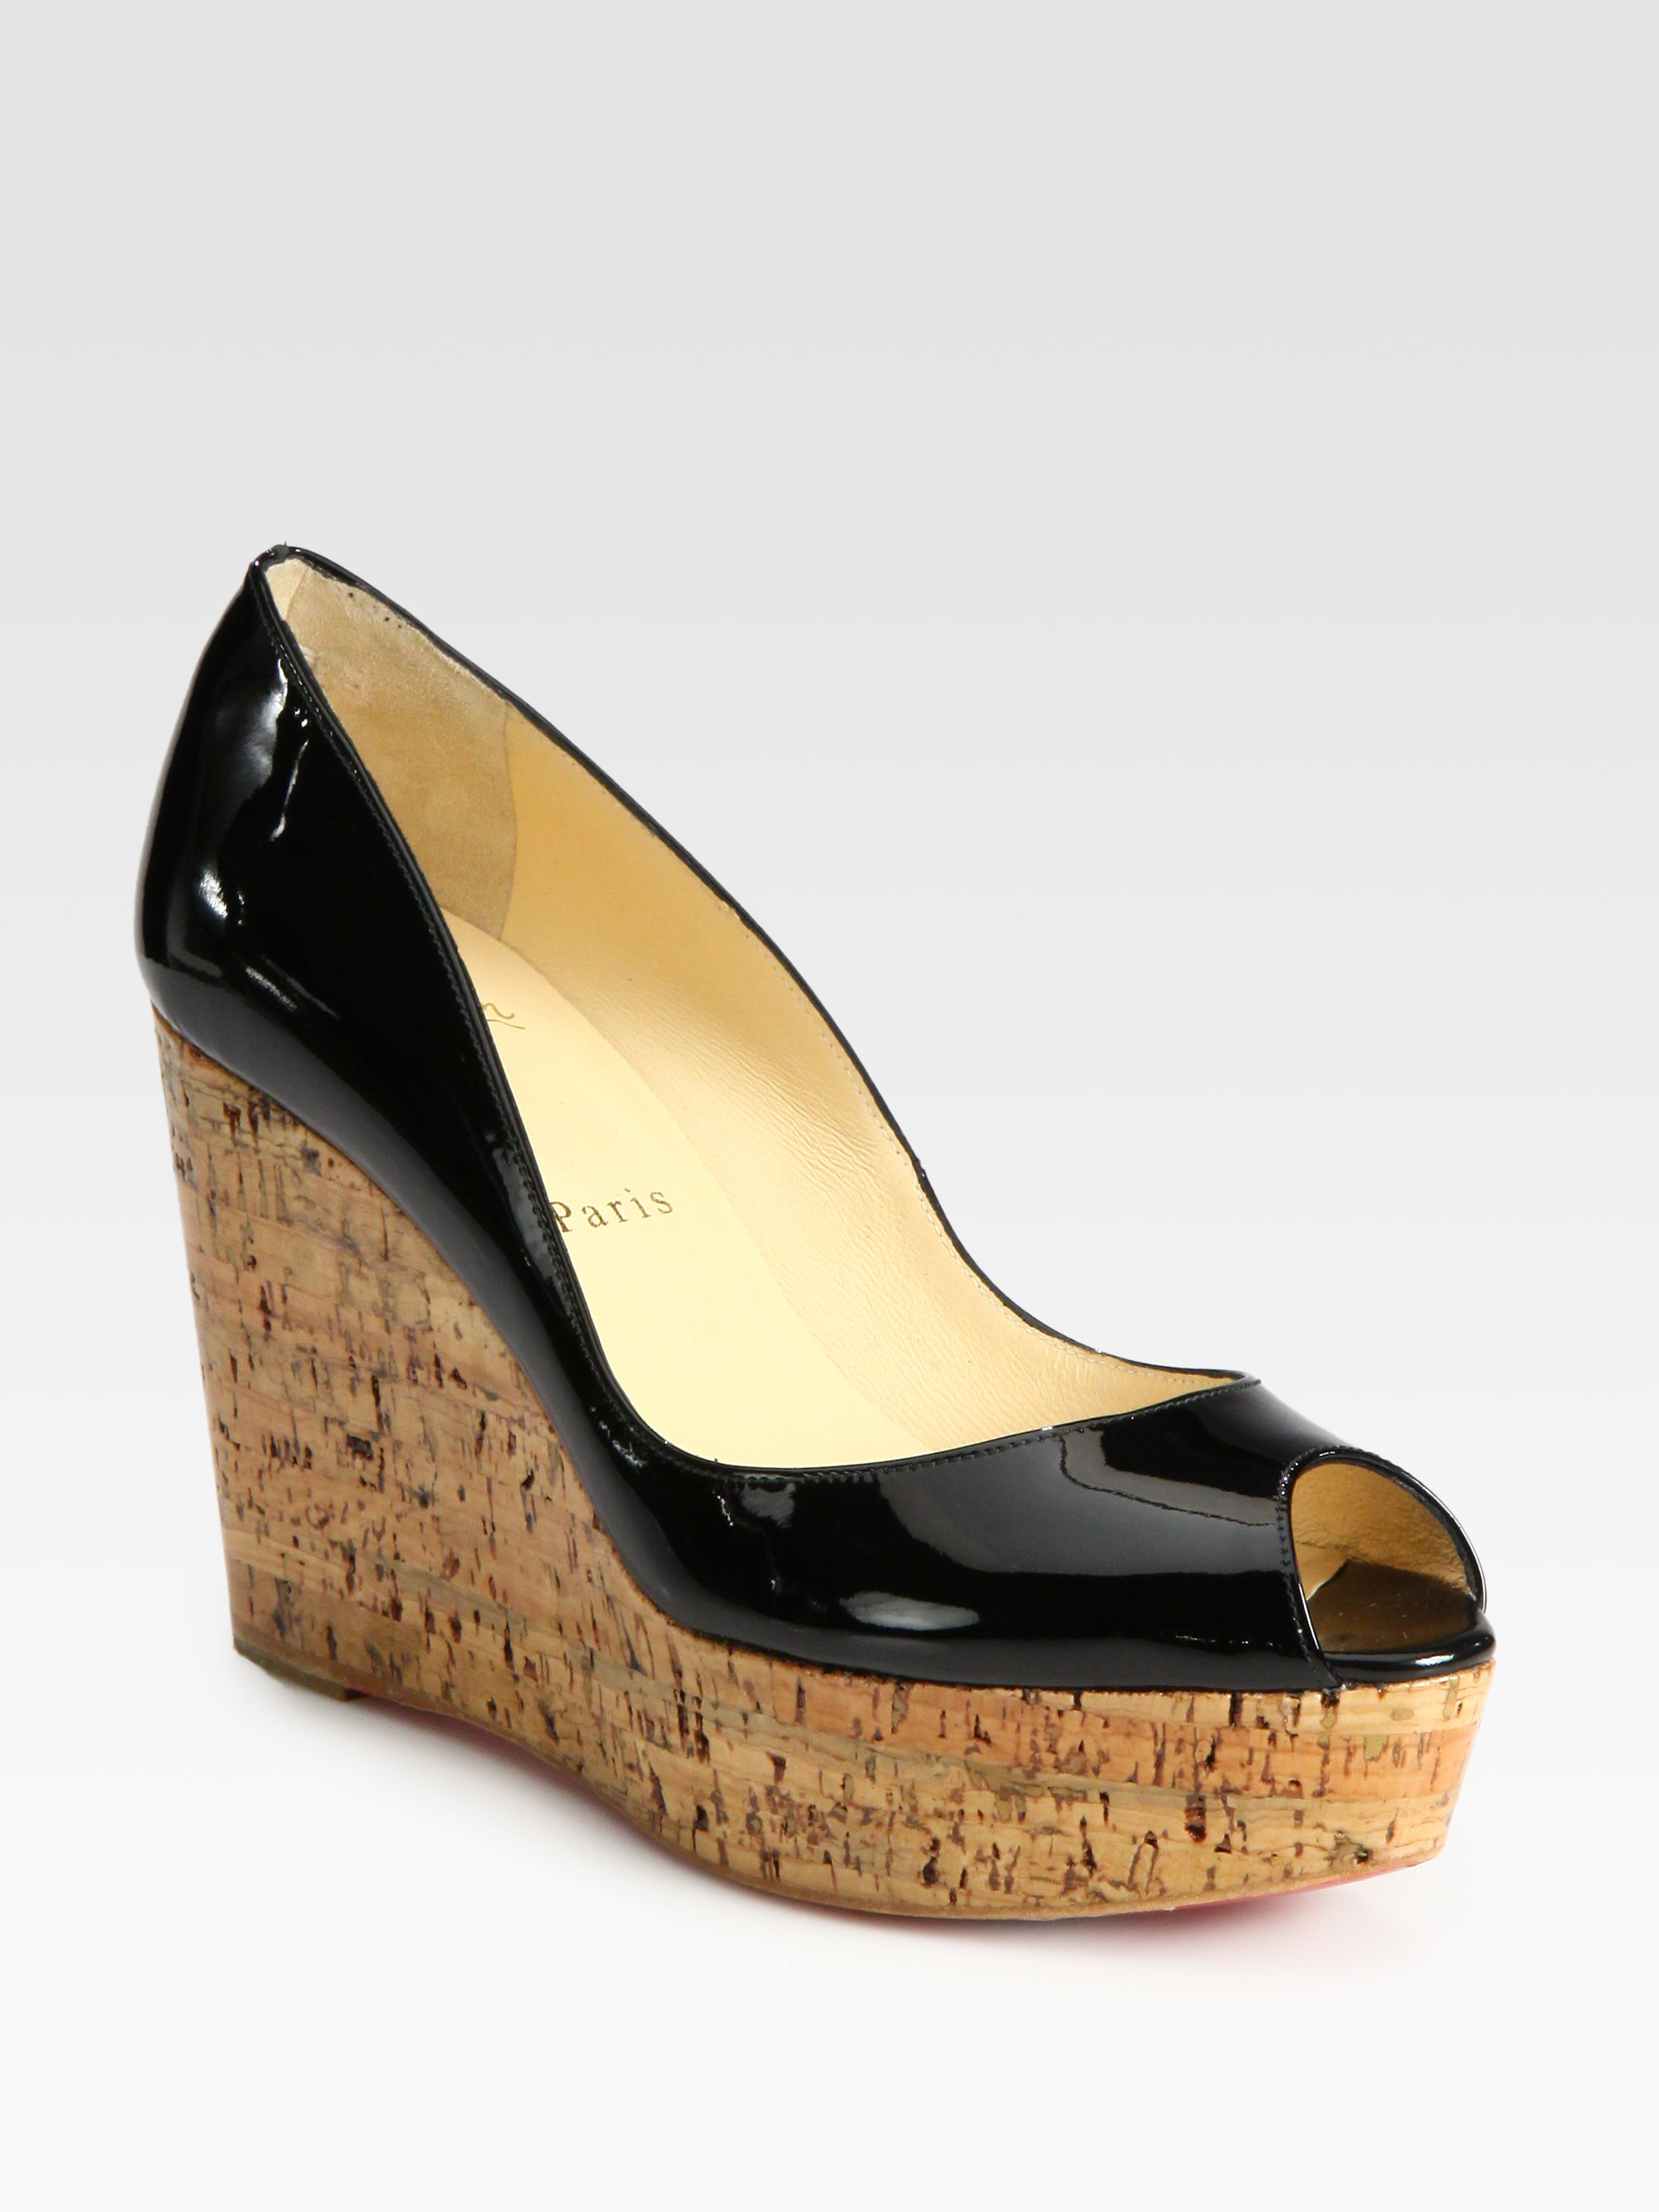 la boutine shoes - christian louboutin slingback wedges Black patent leather covered ...